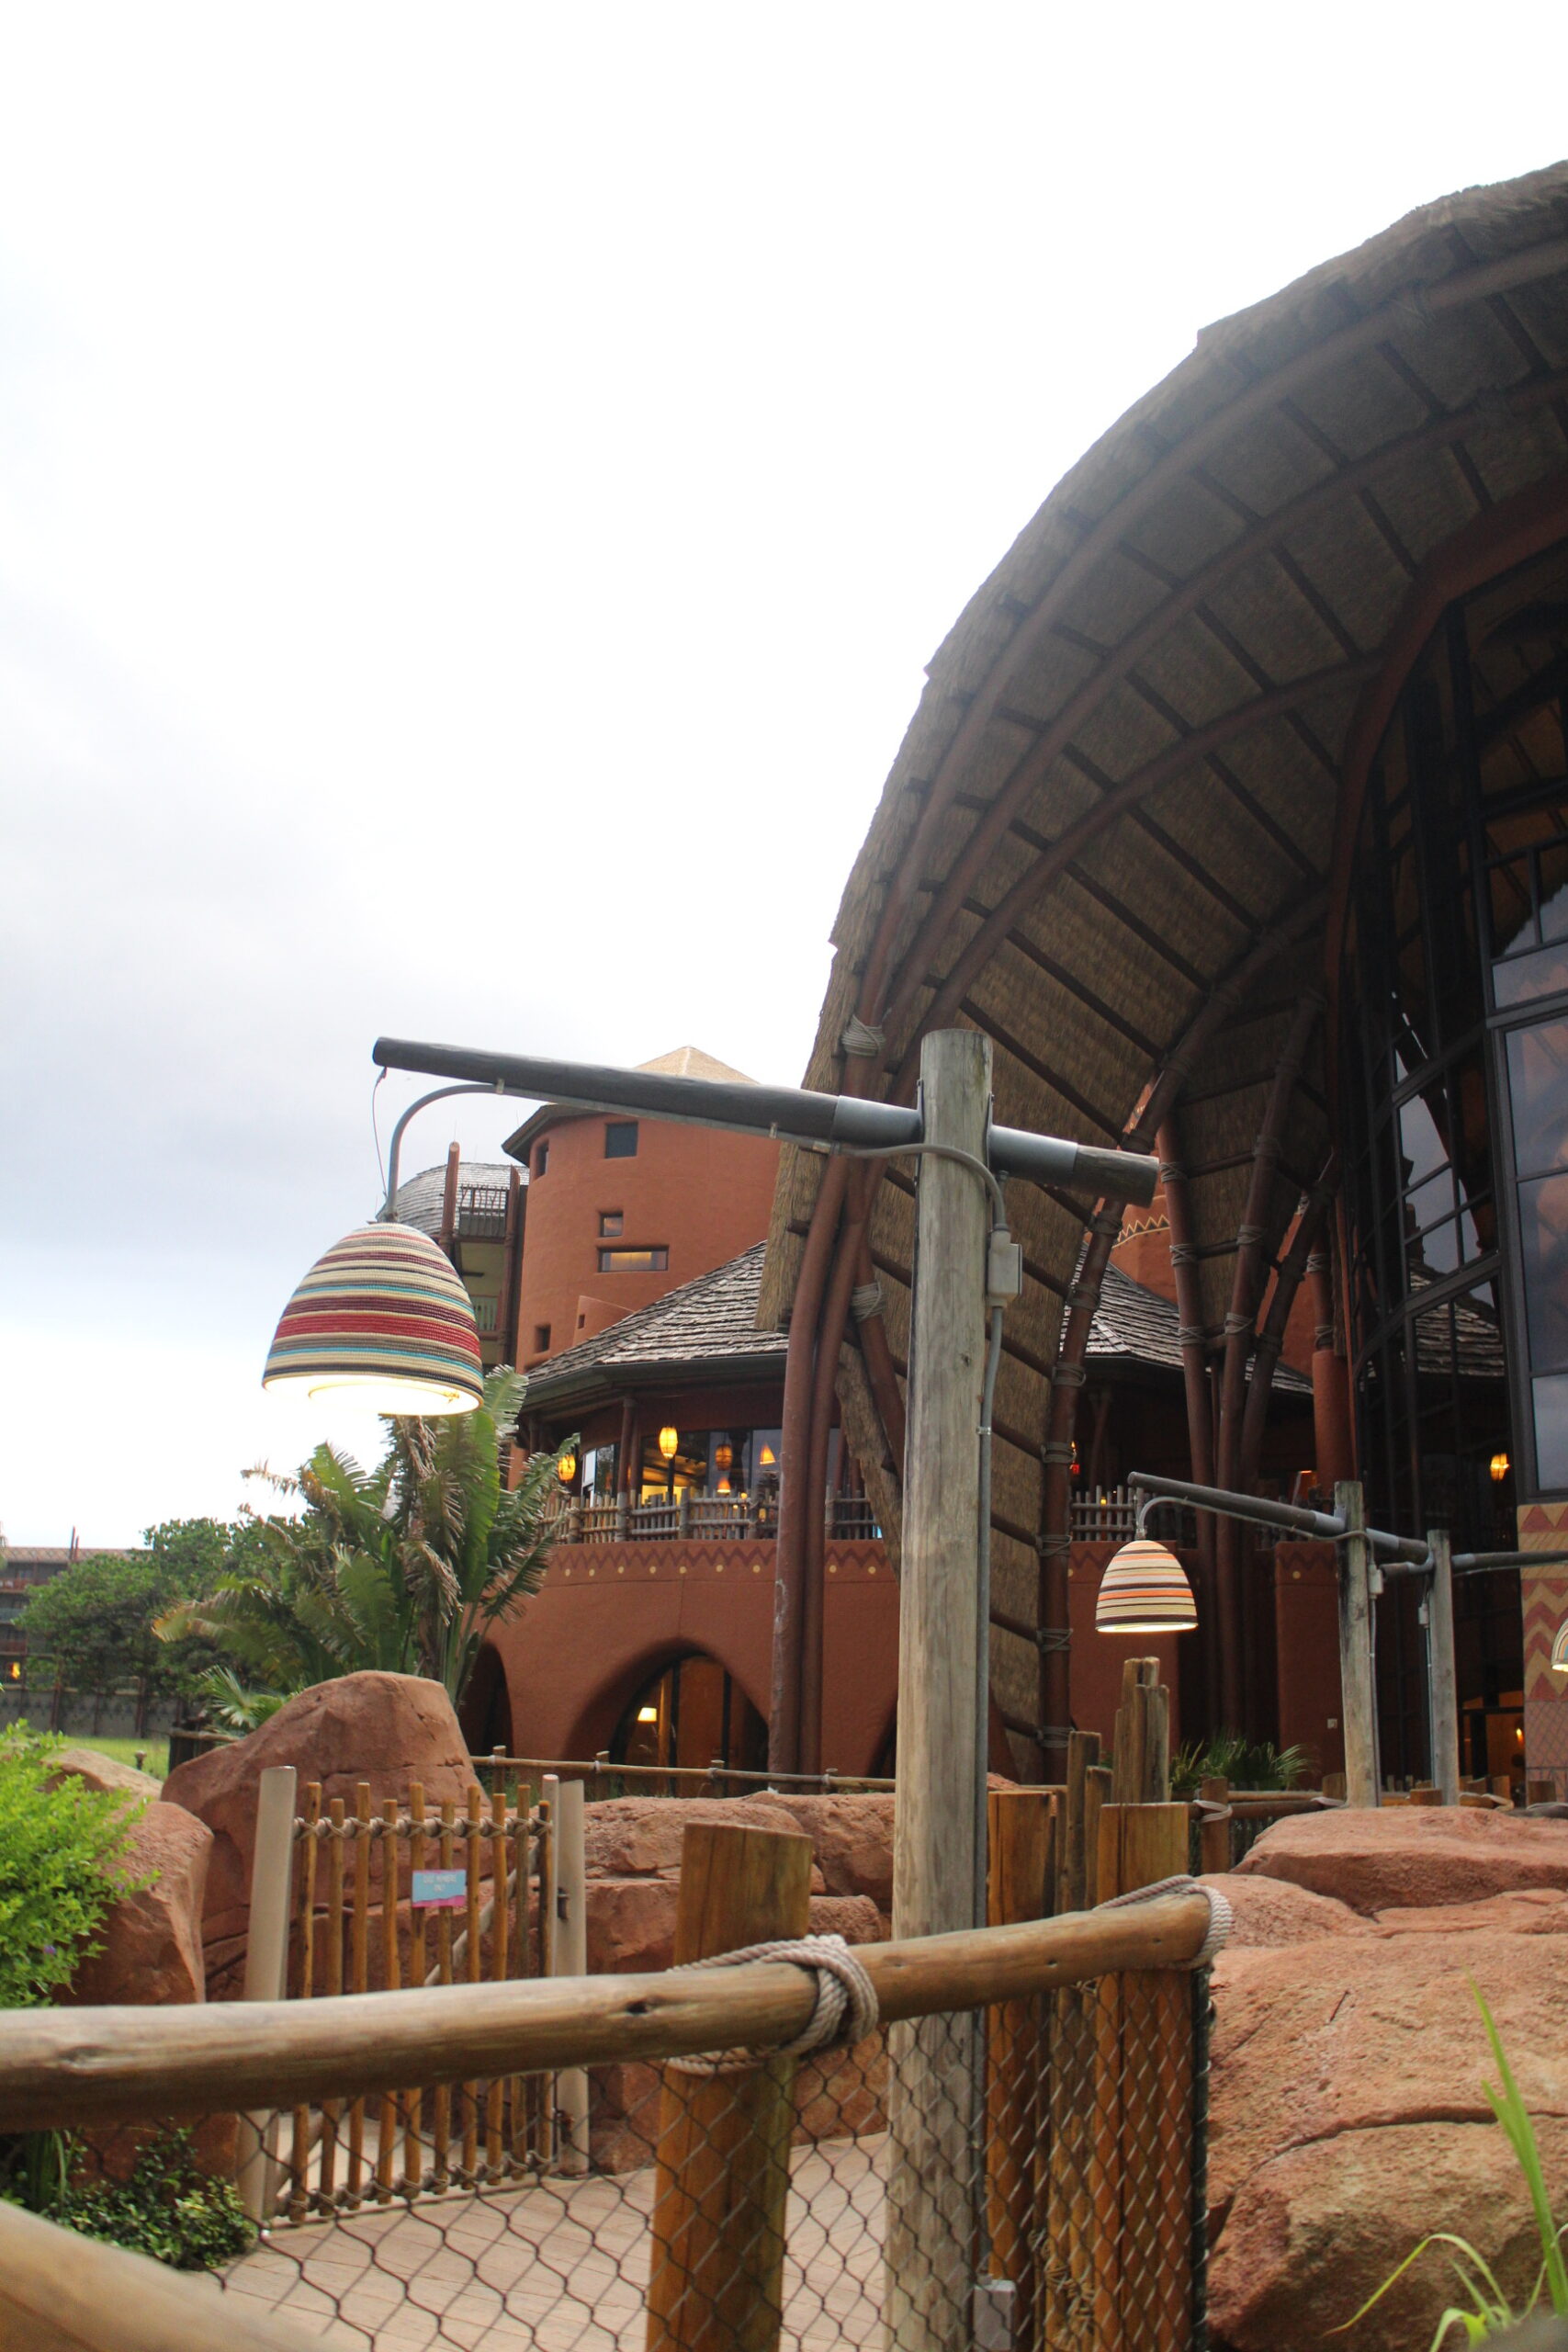 Exterior of Animal Kingdom Lodge's Kidani Village area with clay colored rock work, wood stick fences and tall windows of the lobby.